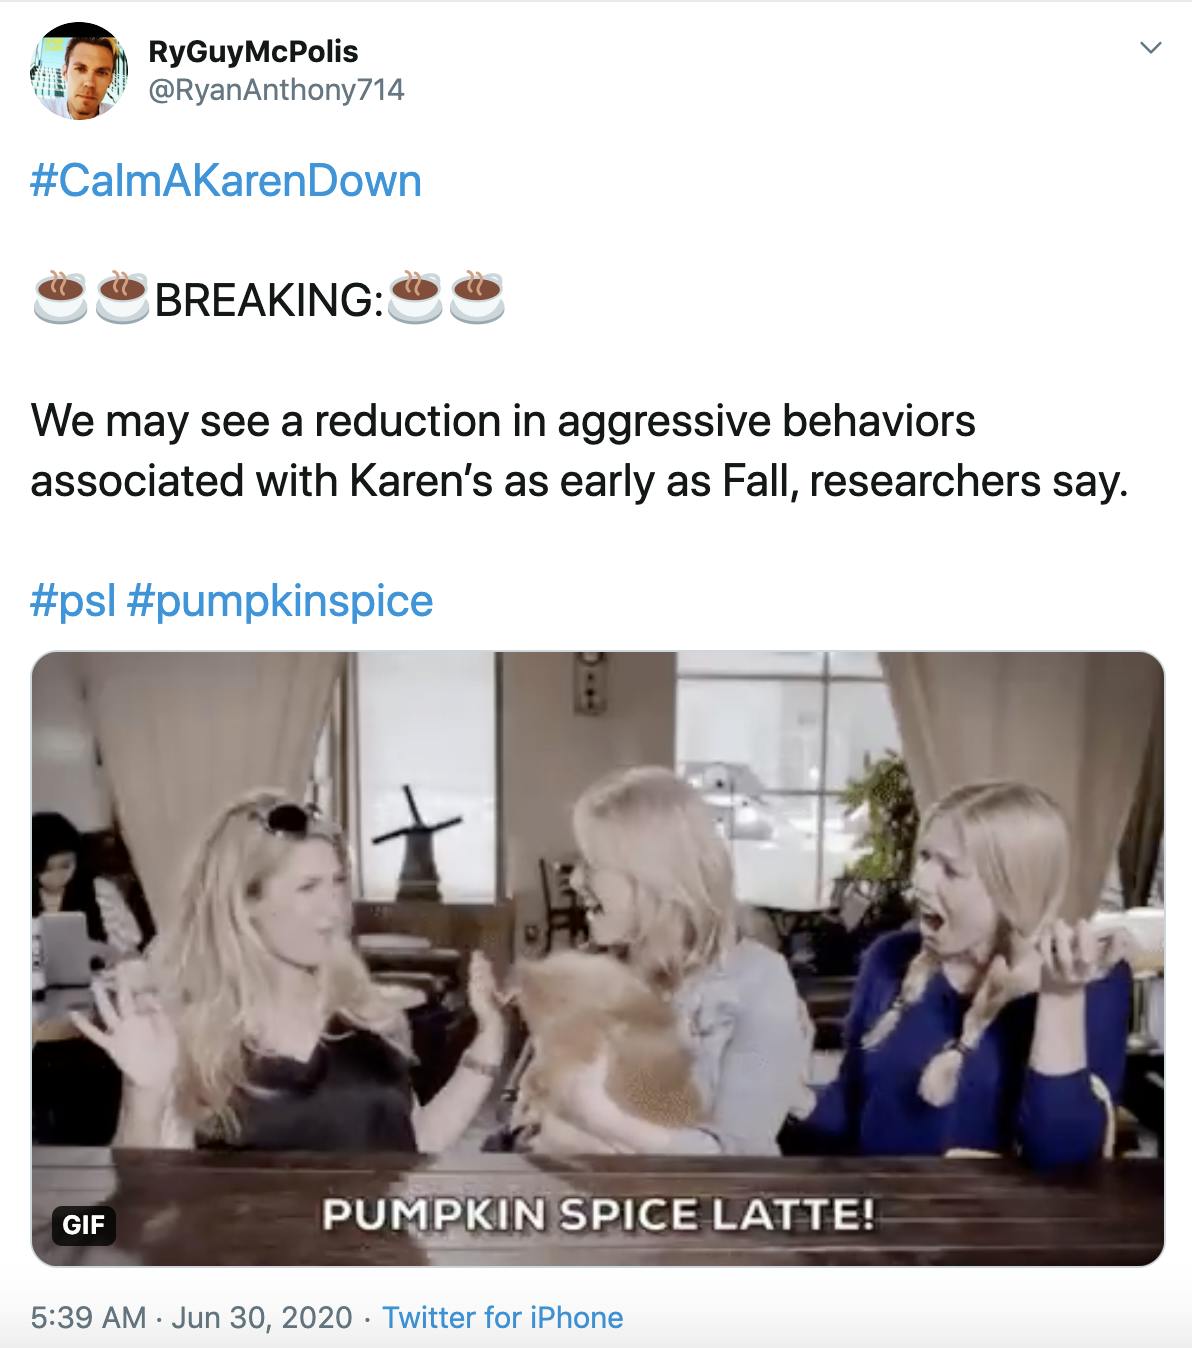 #CalmAKarenDown  ☕️☕️BREAKING:☕️☕️  We may see a reduction in aggressive behaviors associated with Karen’s as early as Fall, researchers say.   #psl #pumpkinspice